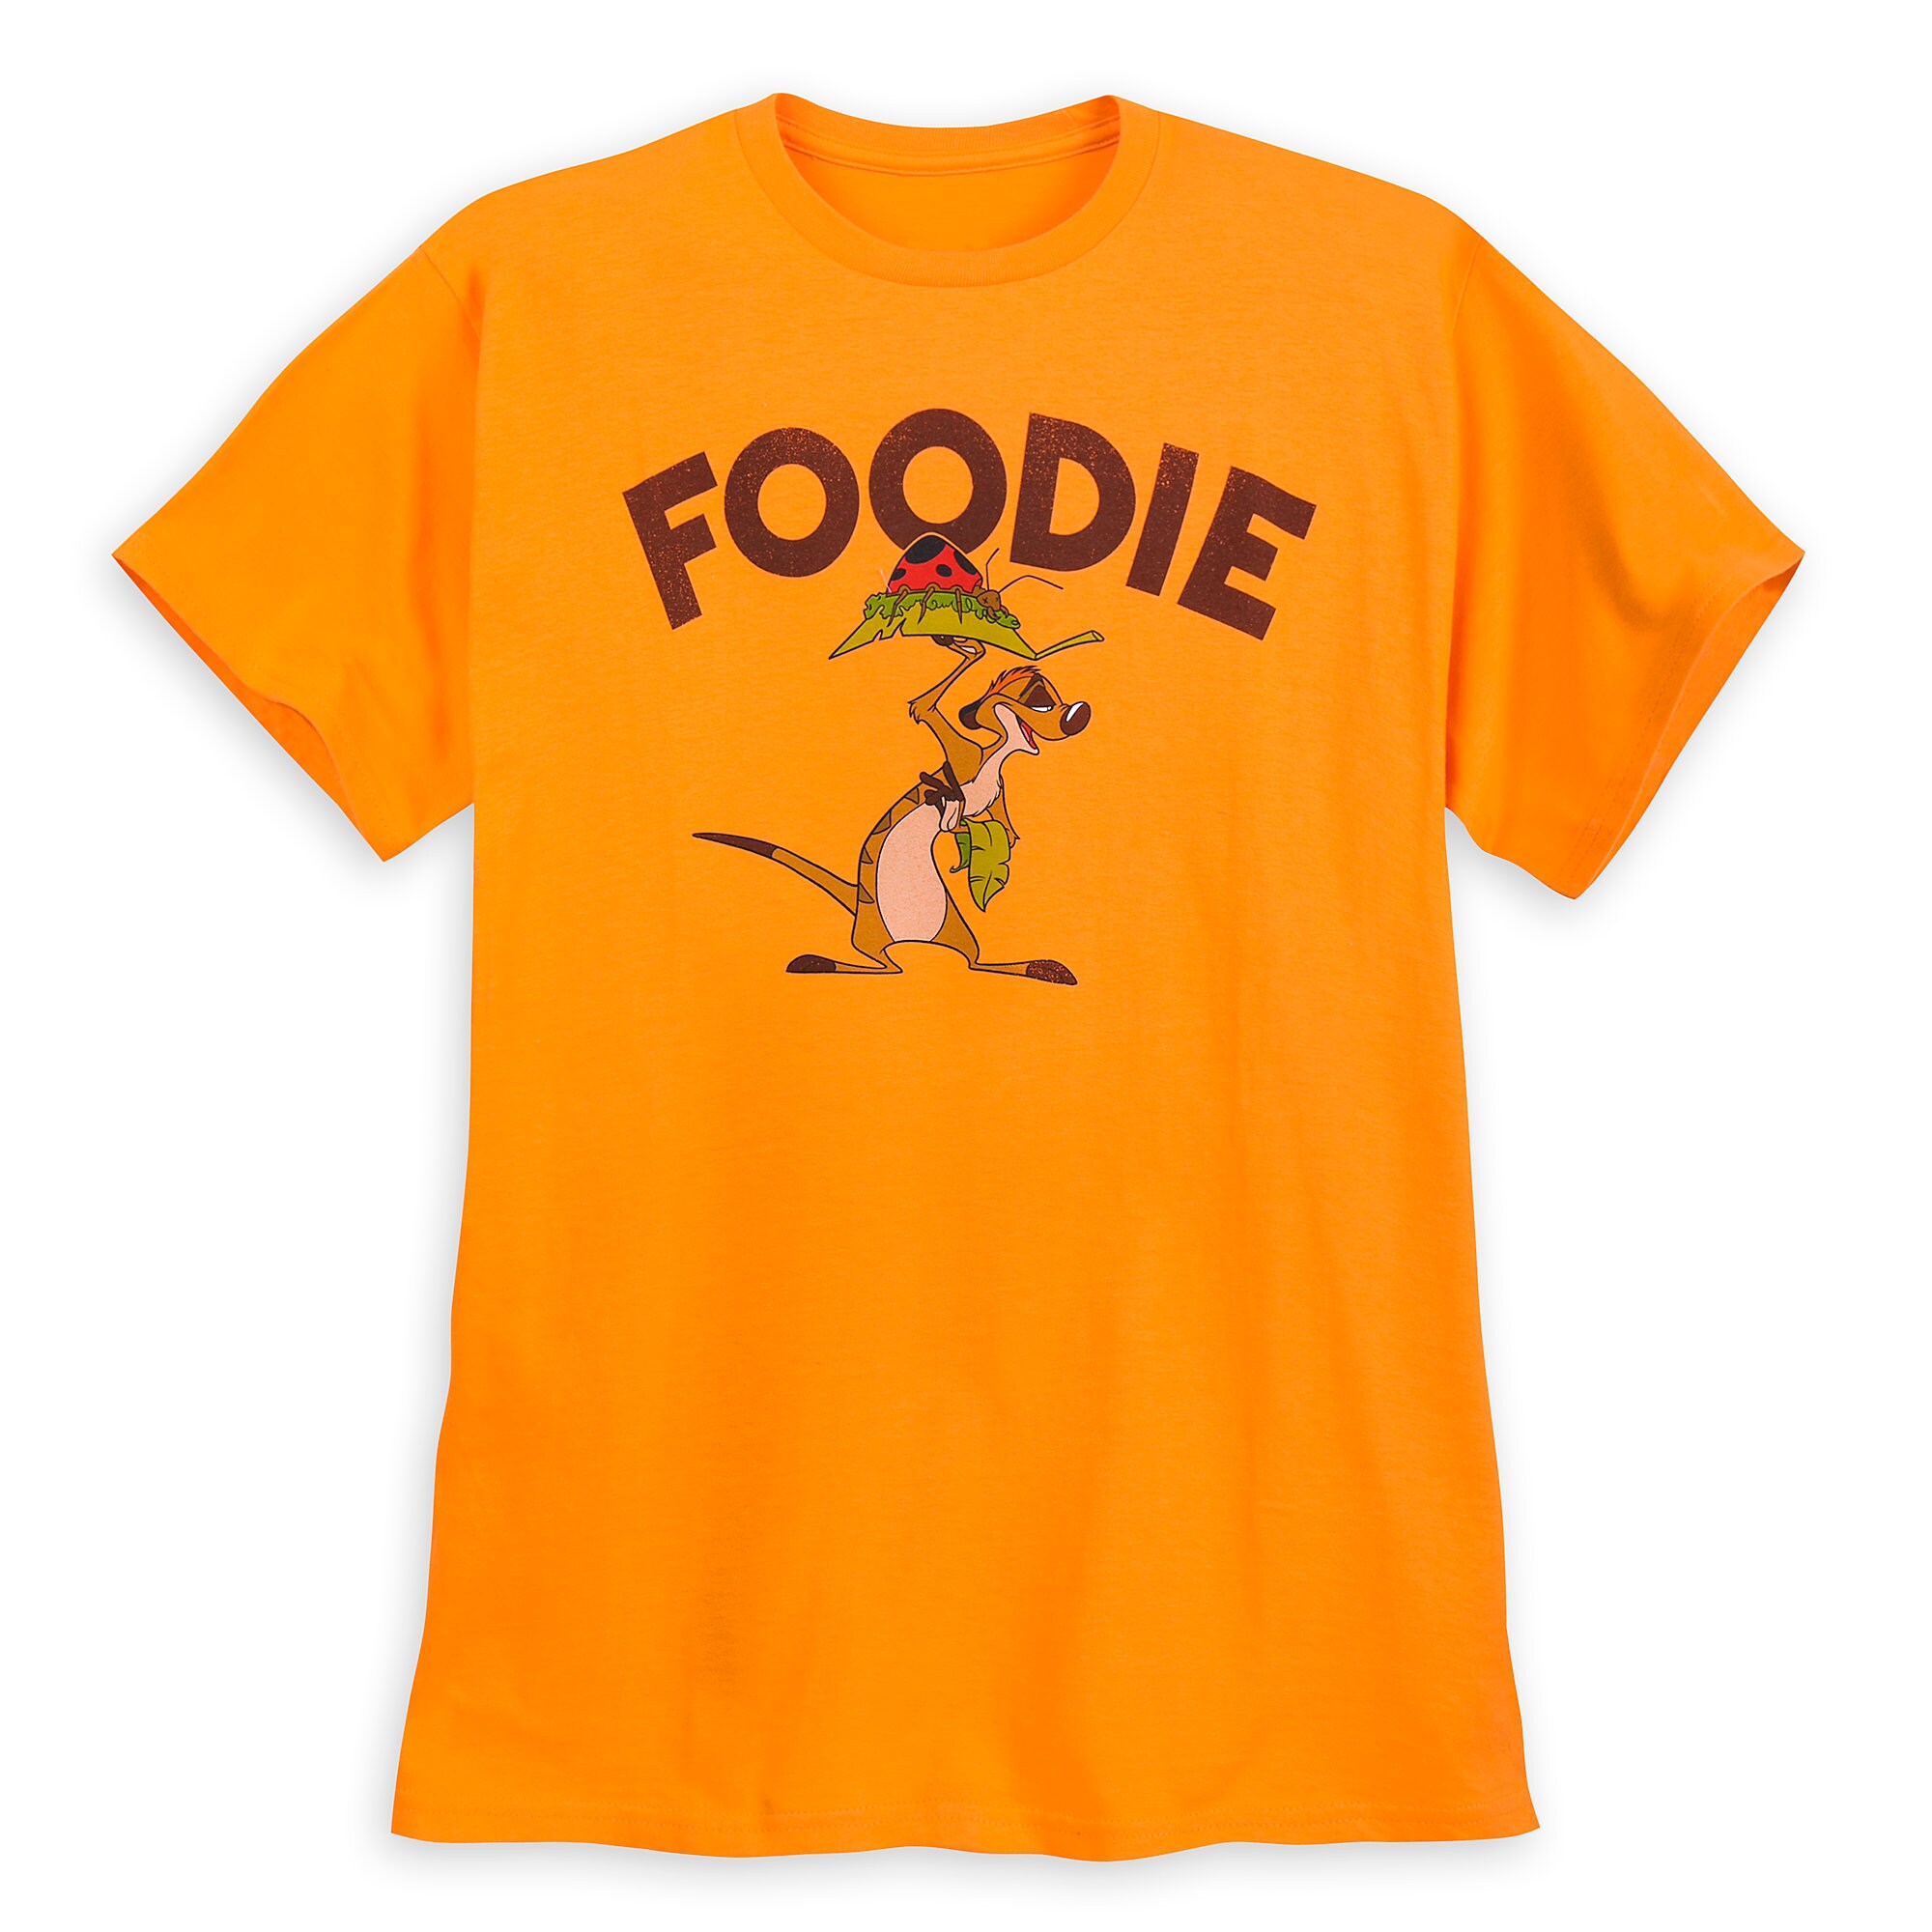 Timon T-Shirt for Adults - The Lion King